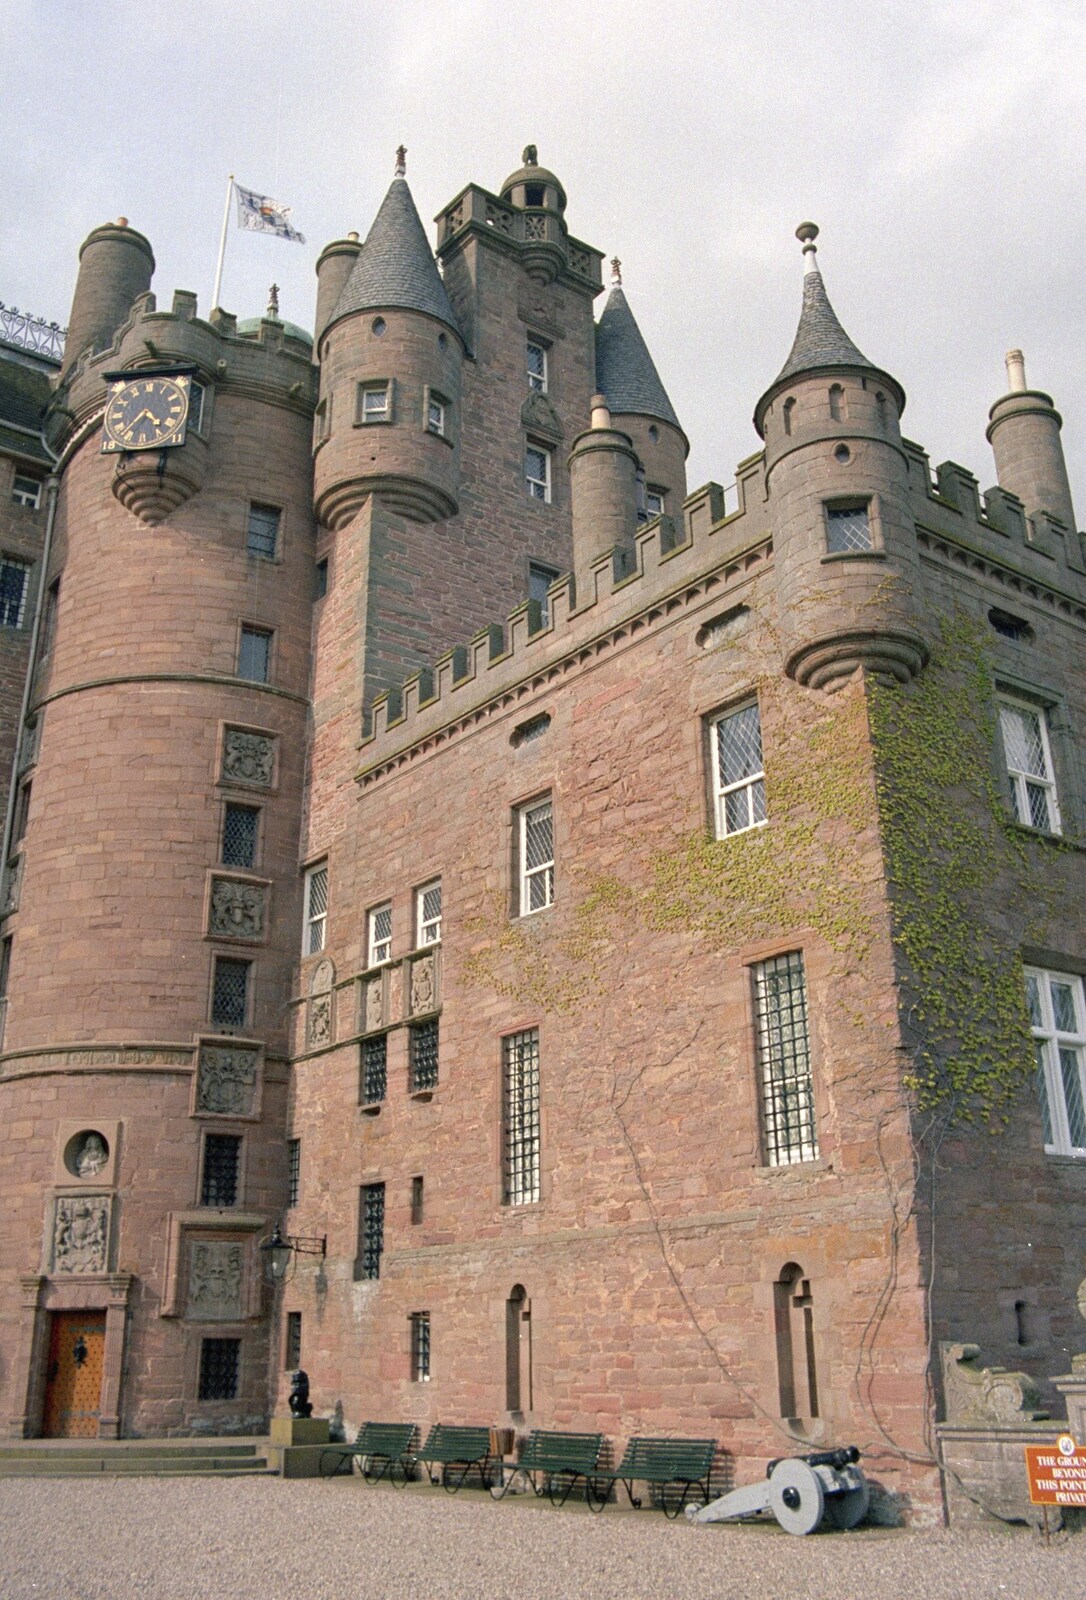 Glamis Castle close-up from A Trip to Pitlochry, Scotland - 24th March 1998